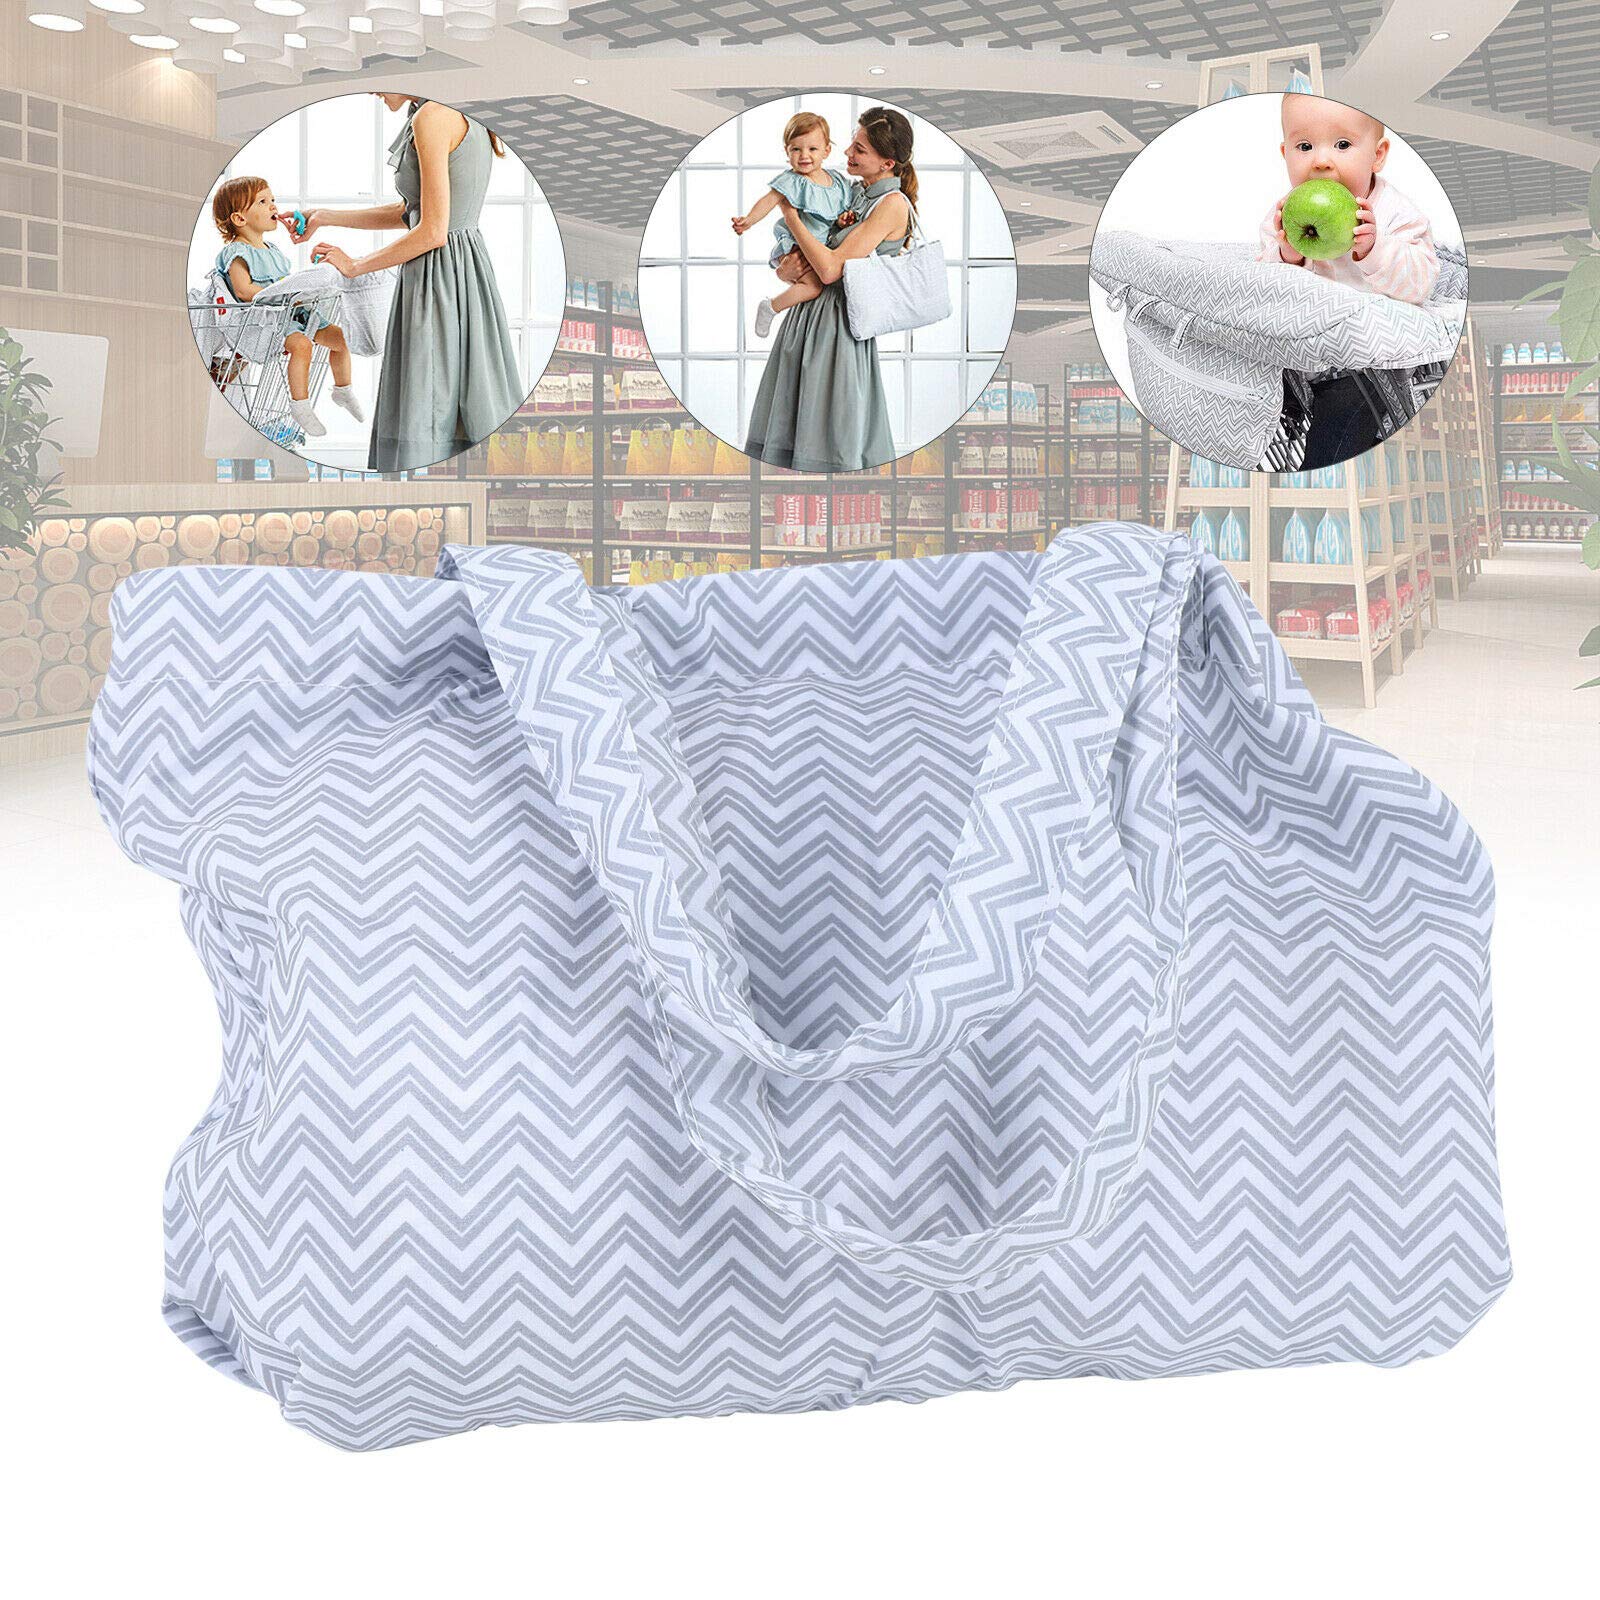 2-in-1 Shopping Cart Cover for Baby